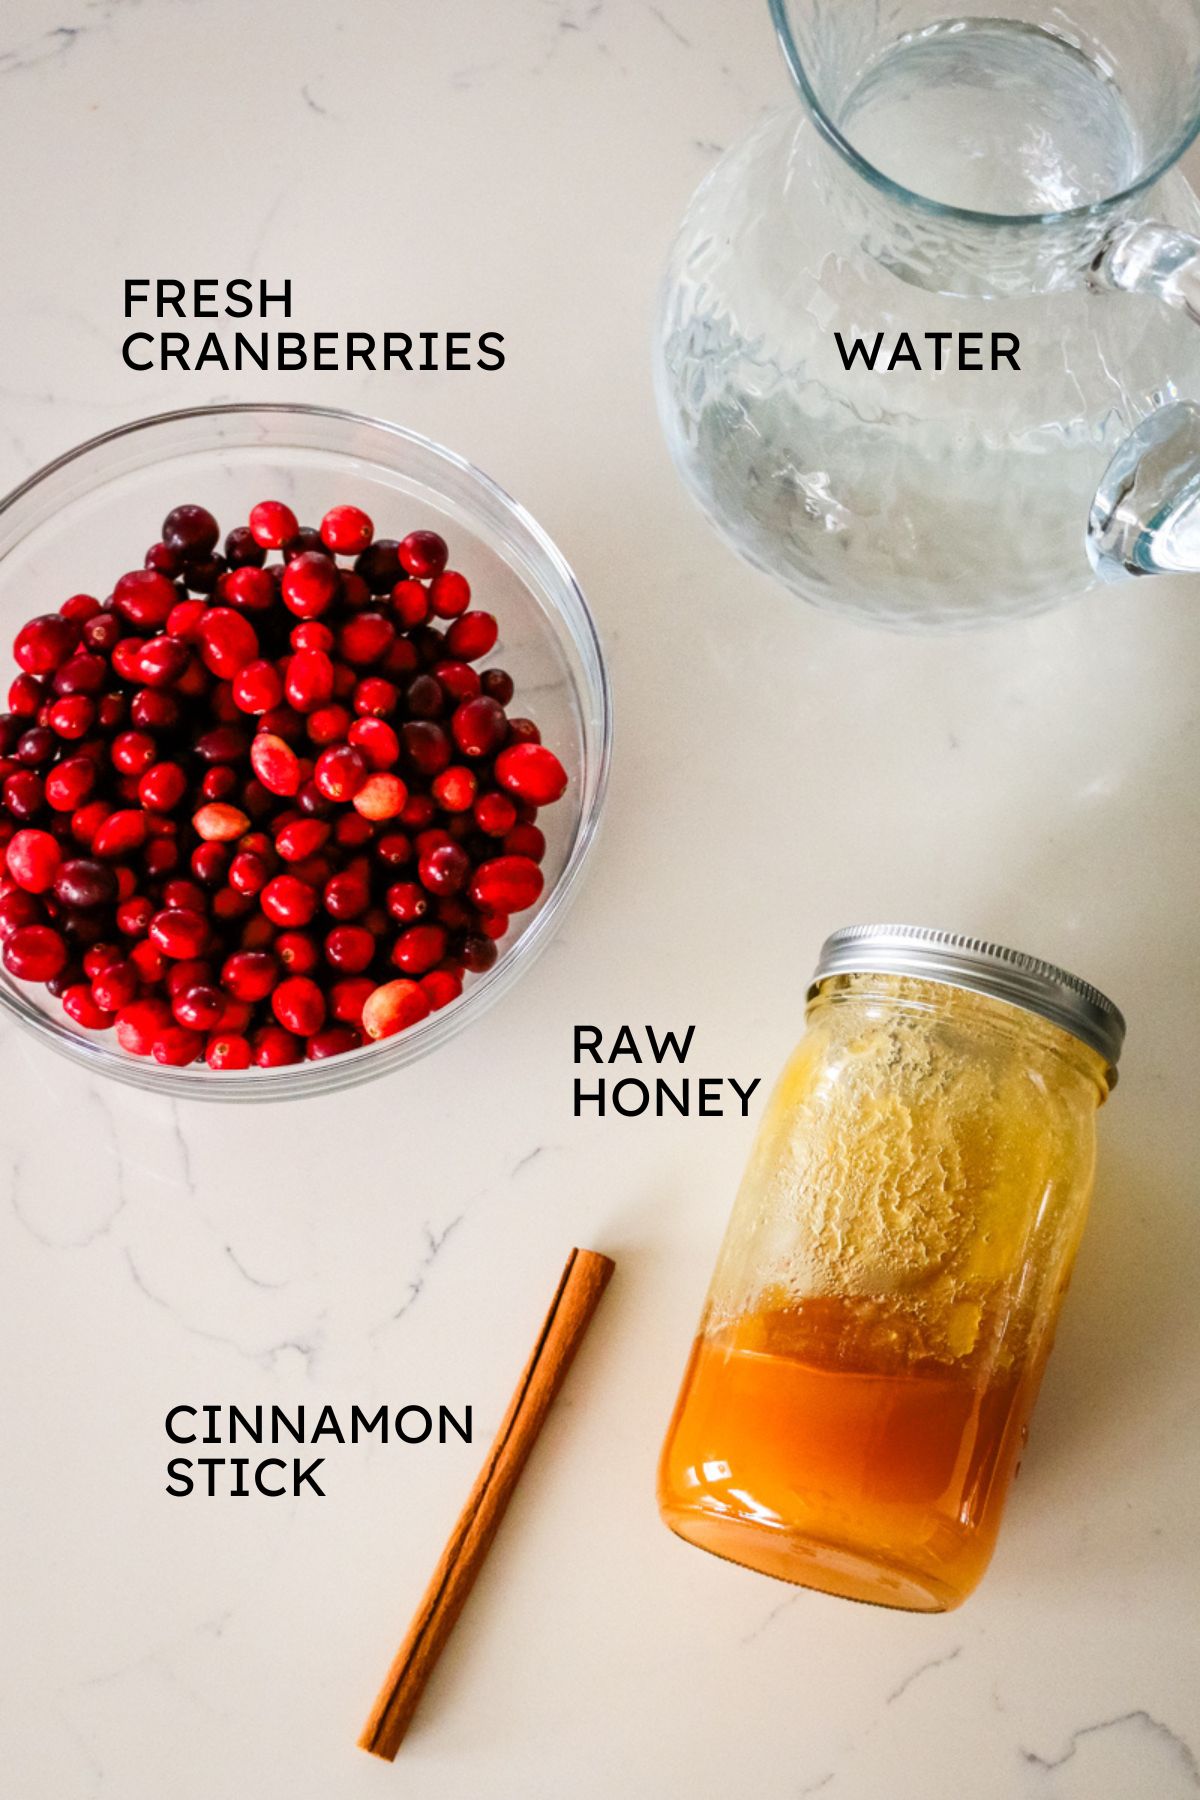 ingredients layed out including fresh cranberries, water, raw honey, and cinnamon stick